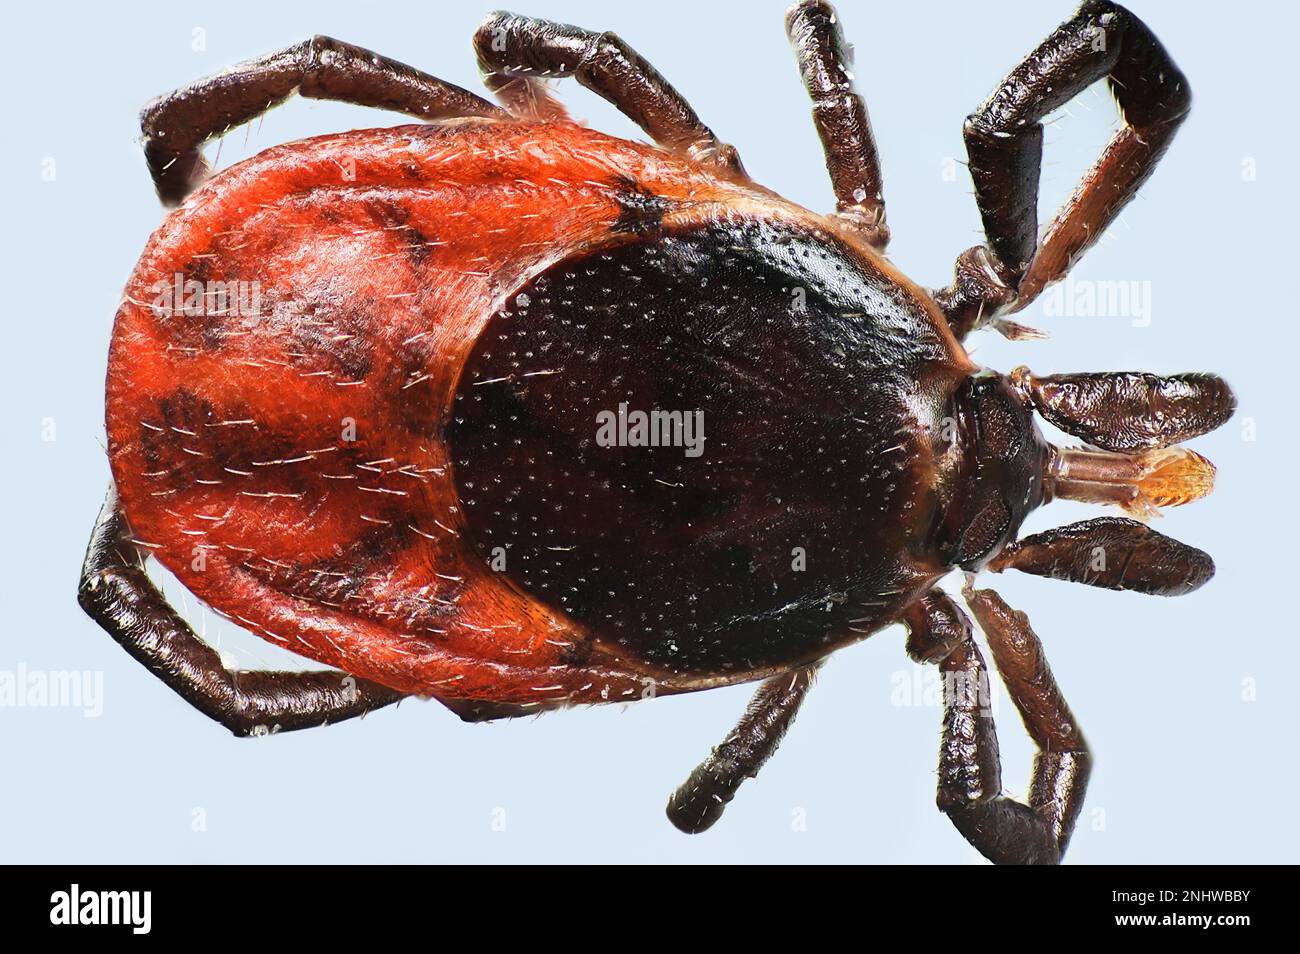 Castor bean tick, Ixodes ricinus, dangerous transmitter of both bacterial and viral pathogens such as Lyme disease and tick-borne encephalitis., micro Stock Photo